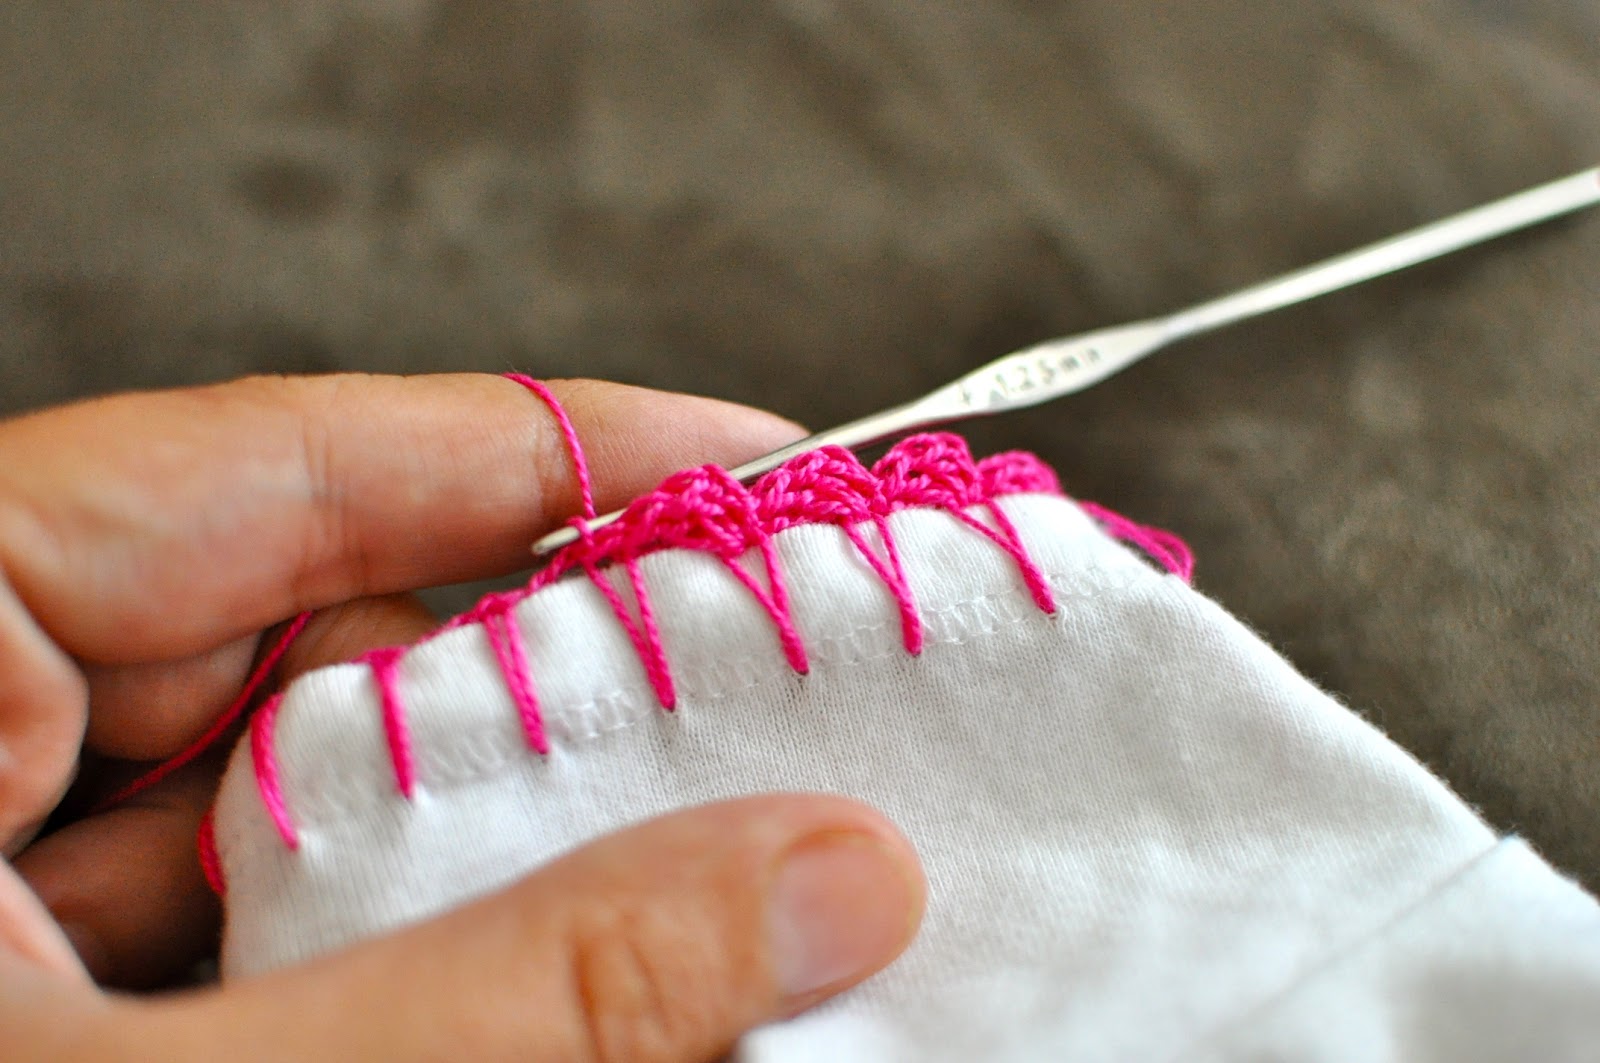 Just be happy!: Crochet Edge Tutorial How To Make Holes In Fabric For Crochet Edging